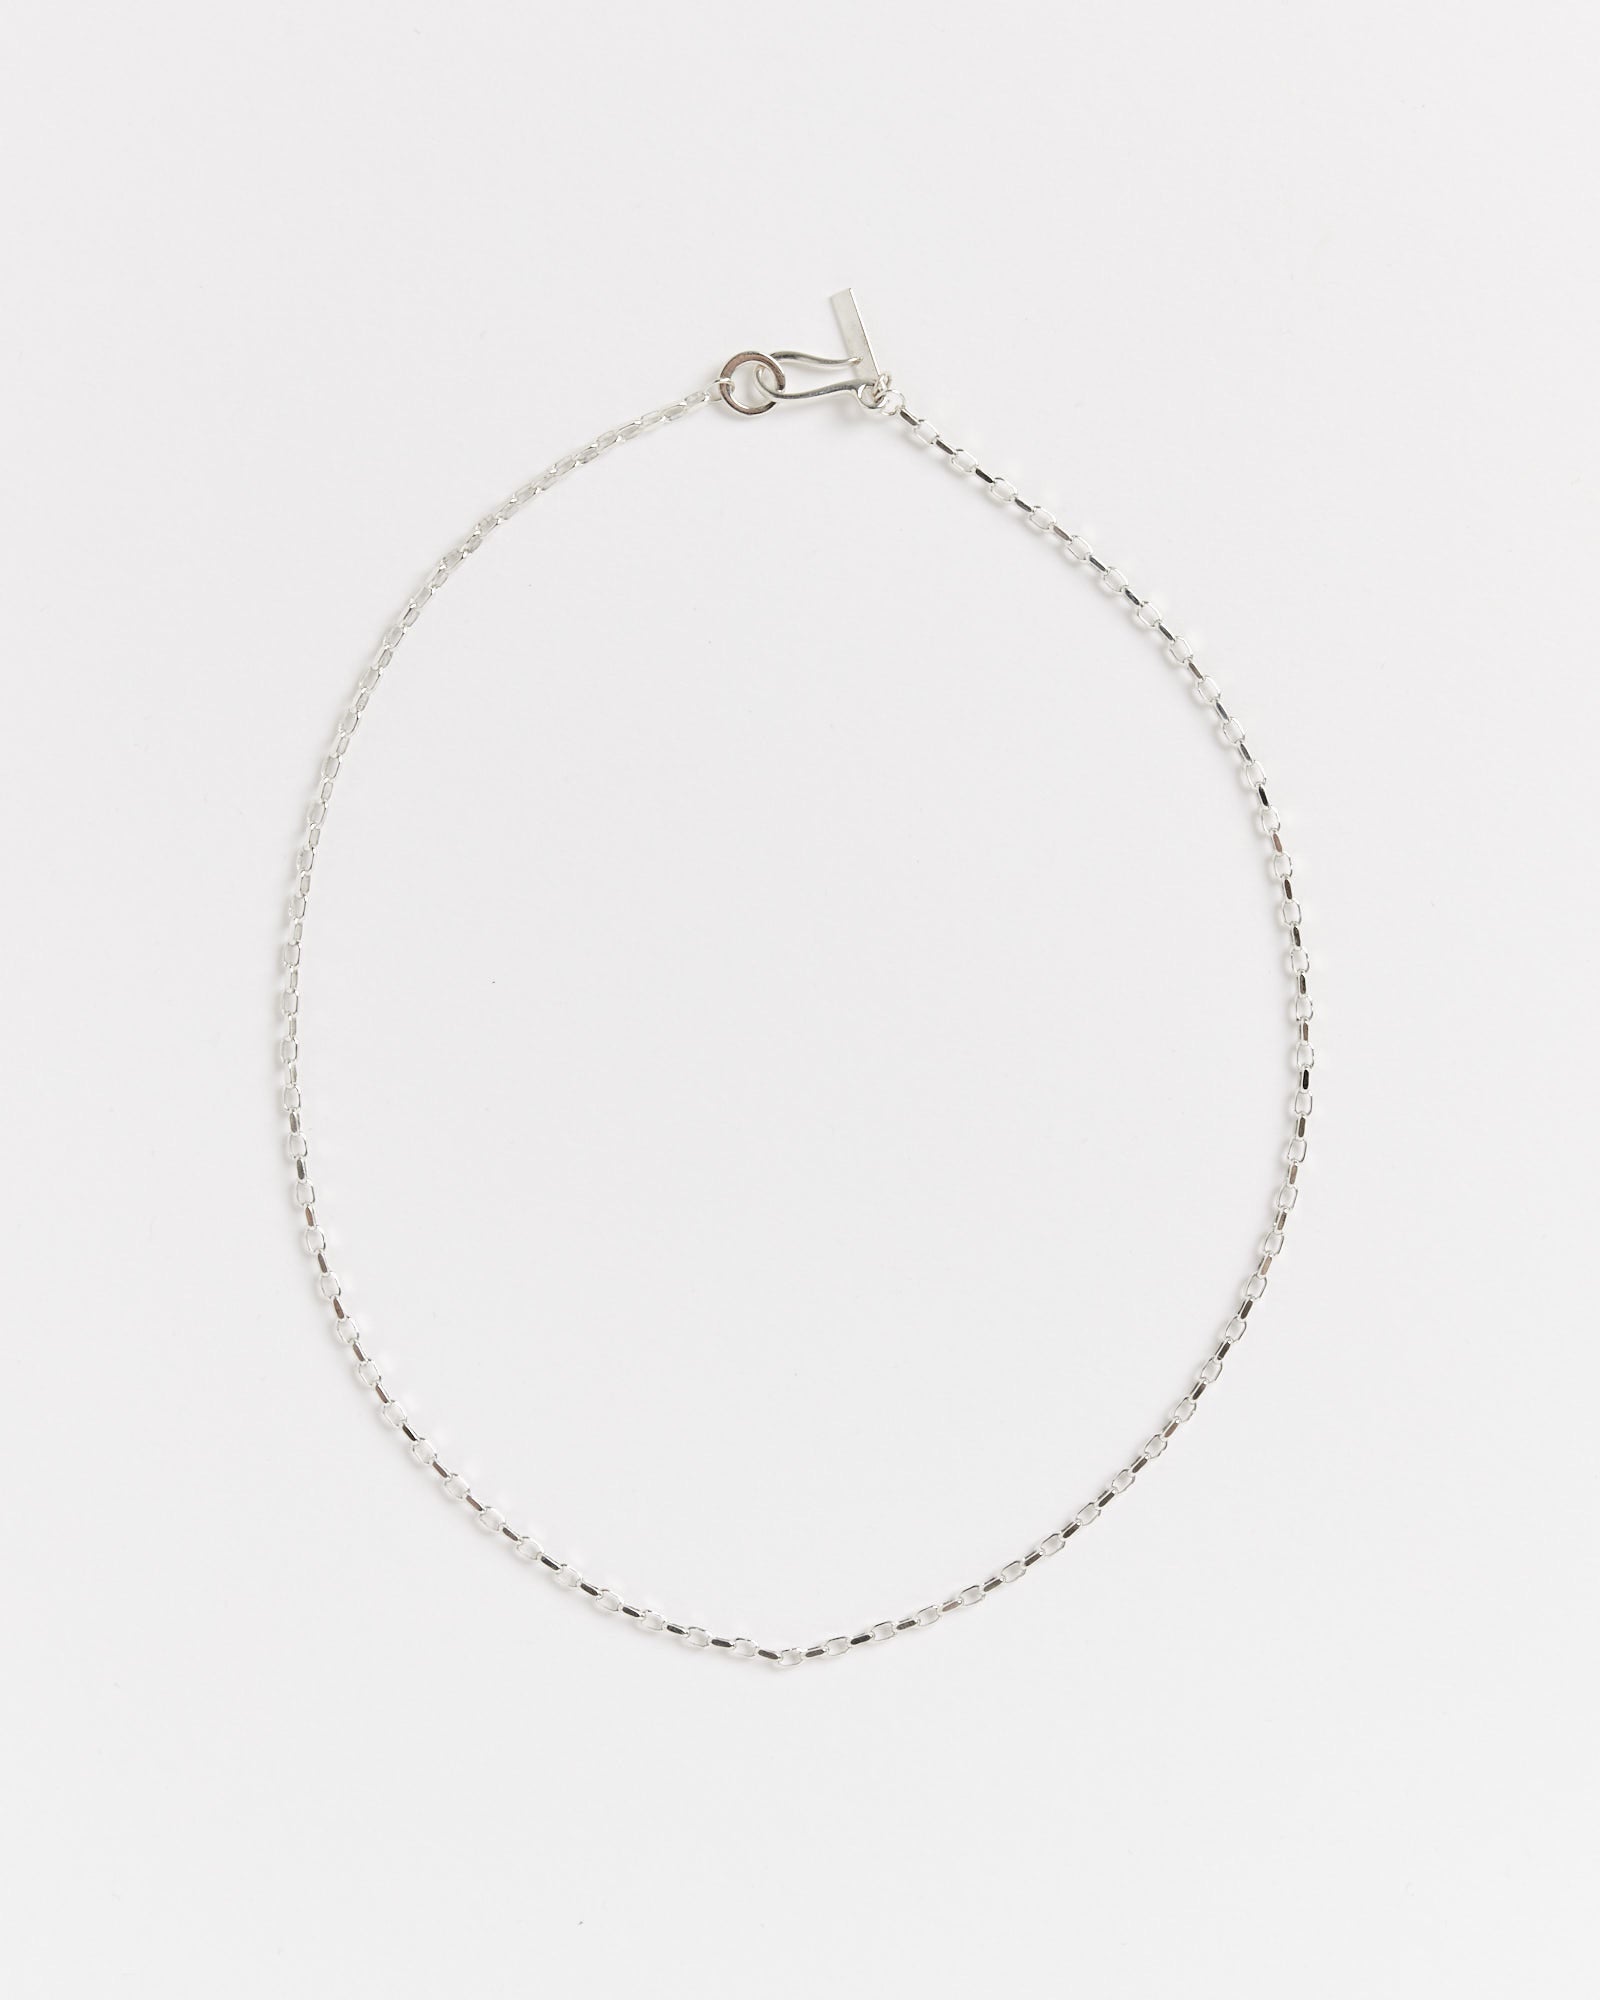 Flaneur Chain in Sterling Silver